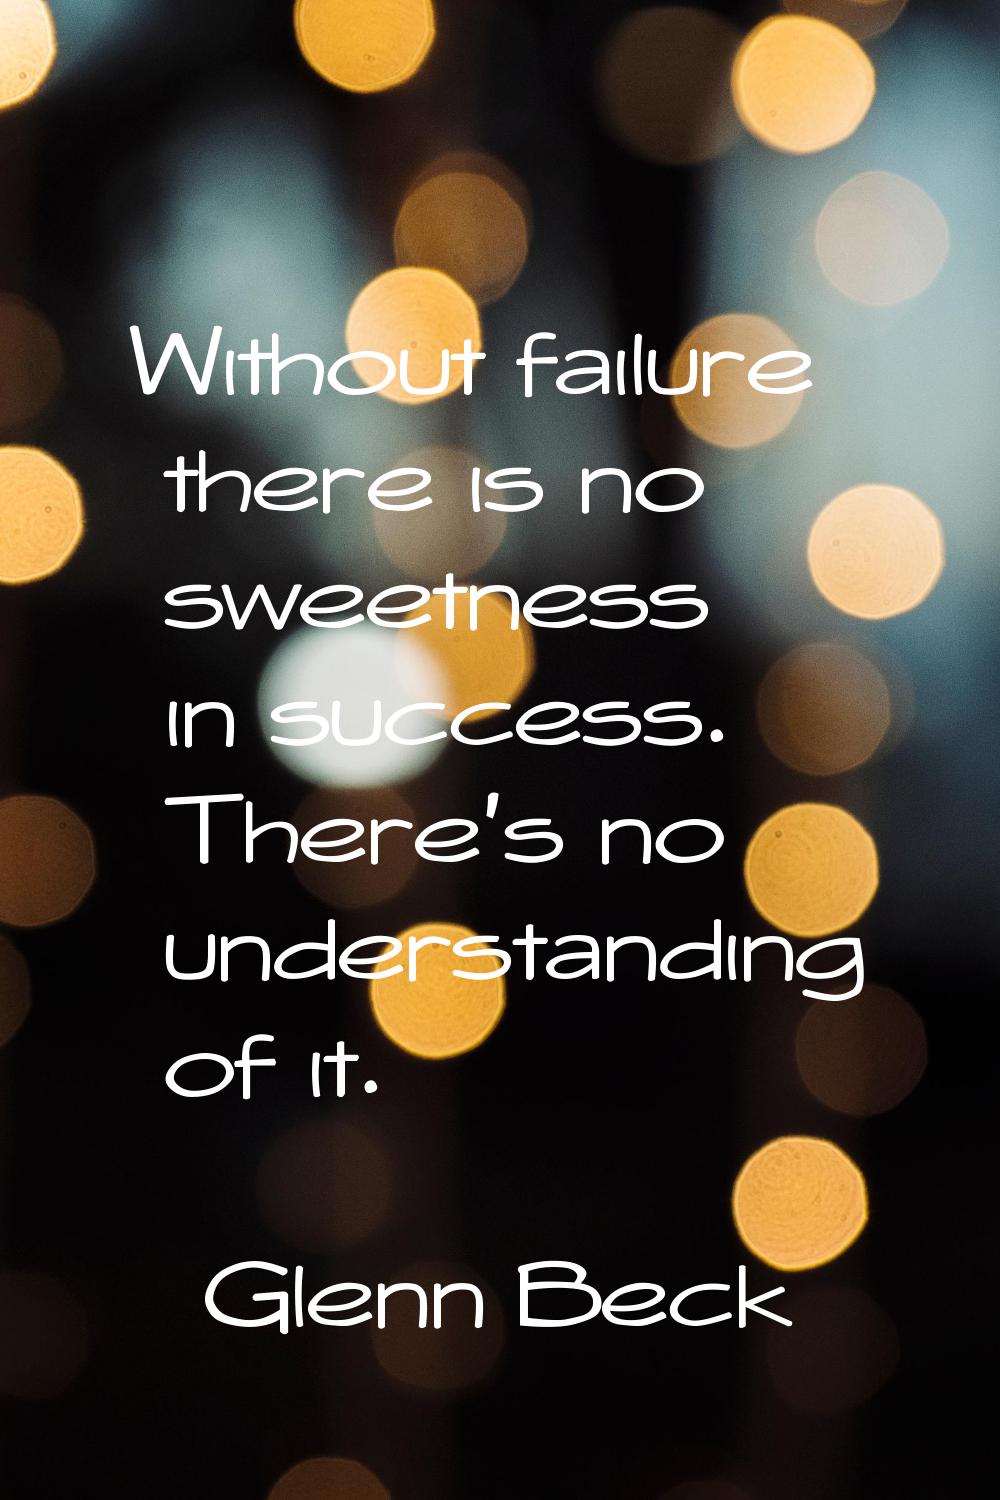 Without failure there is no sweetness in success. There's no understanding of it.